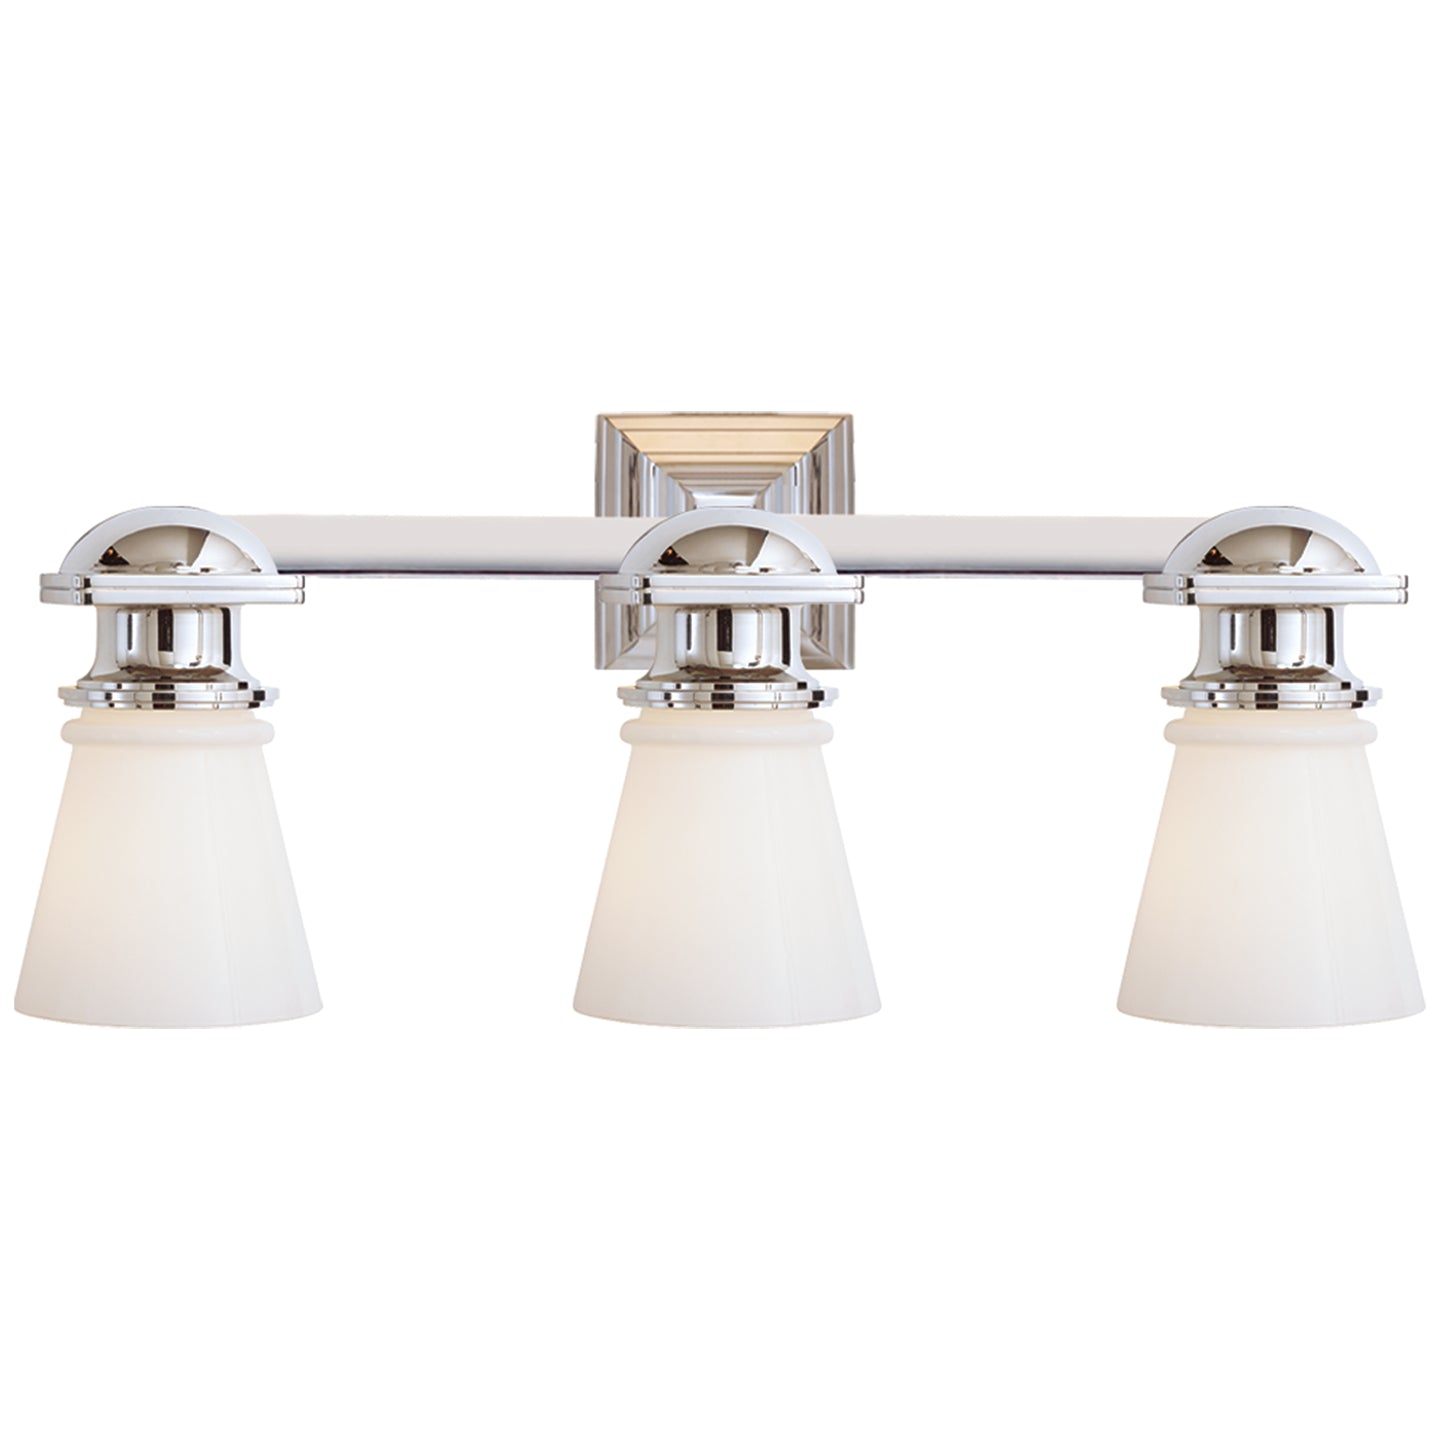 Load image into Gallery viewer, Visual Comfort Signature - SL 2153PN-WG - Three Light Wall Sconce - NY Subway - Polished Nickel
